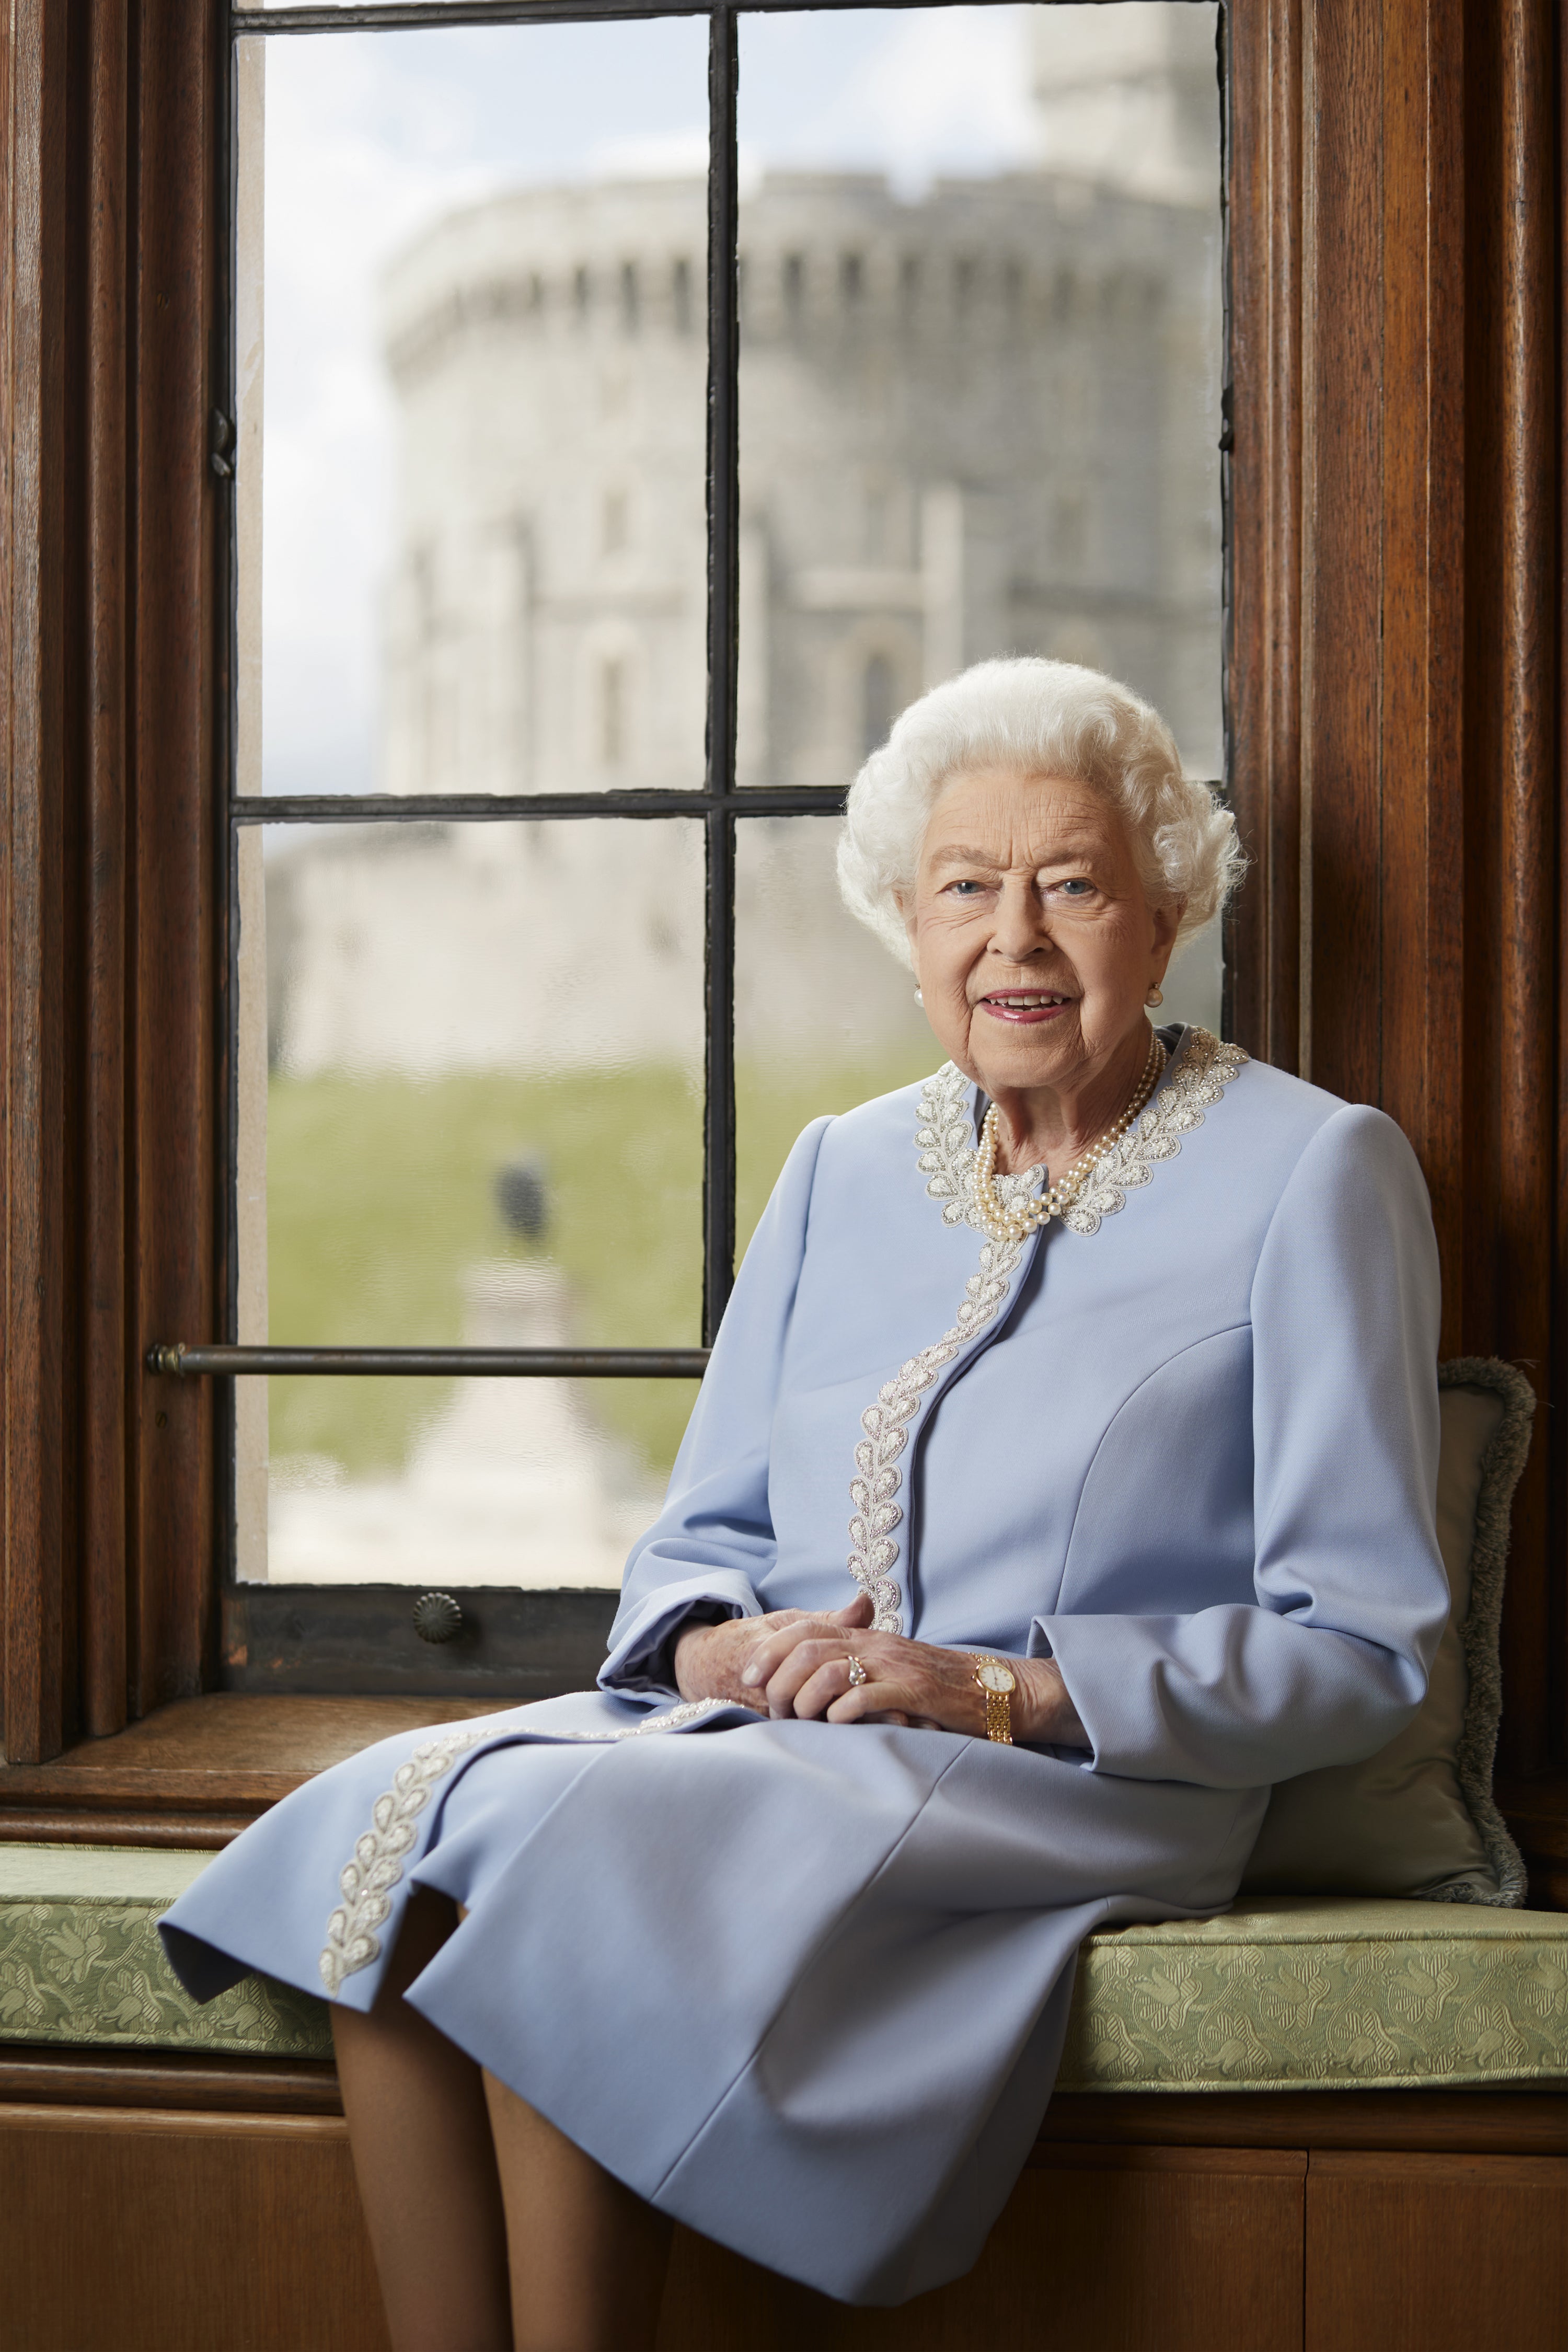 The Queen was pictured seated in her official Jubilee portrait (Royal Household/Ranald Mackechnie/PA)